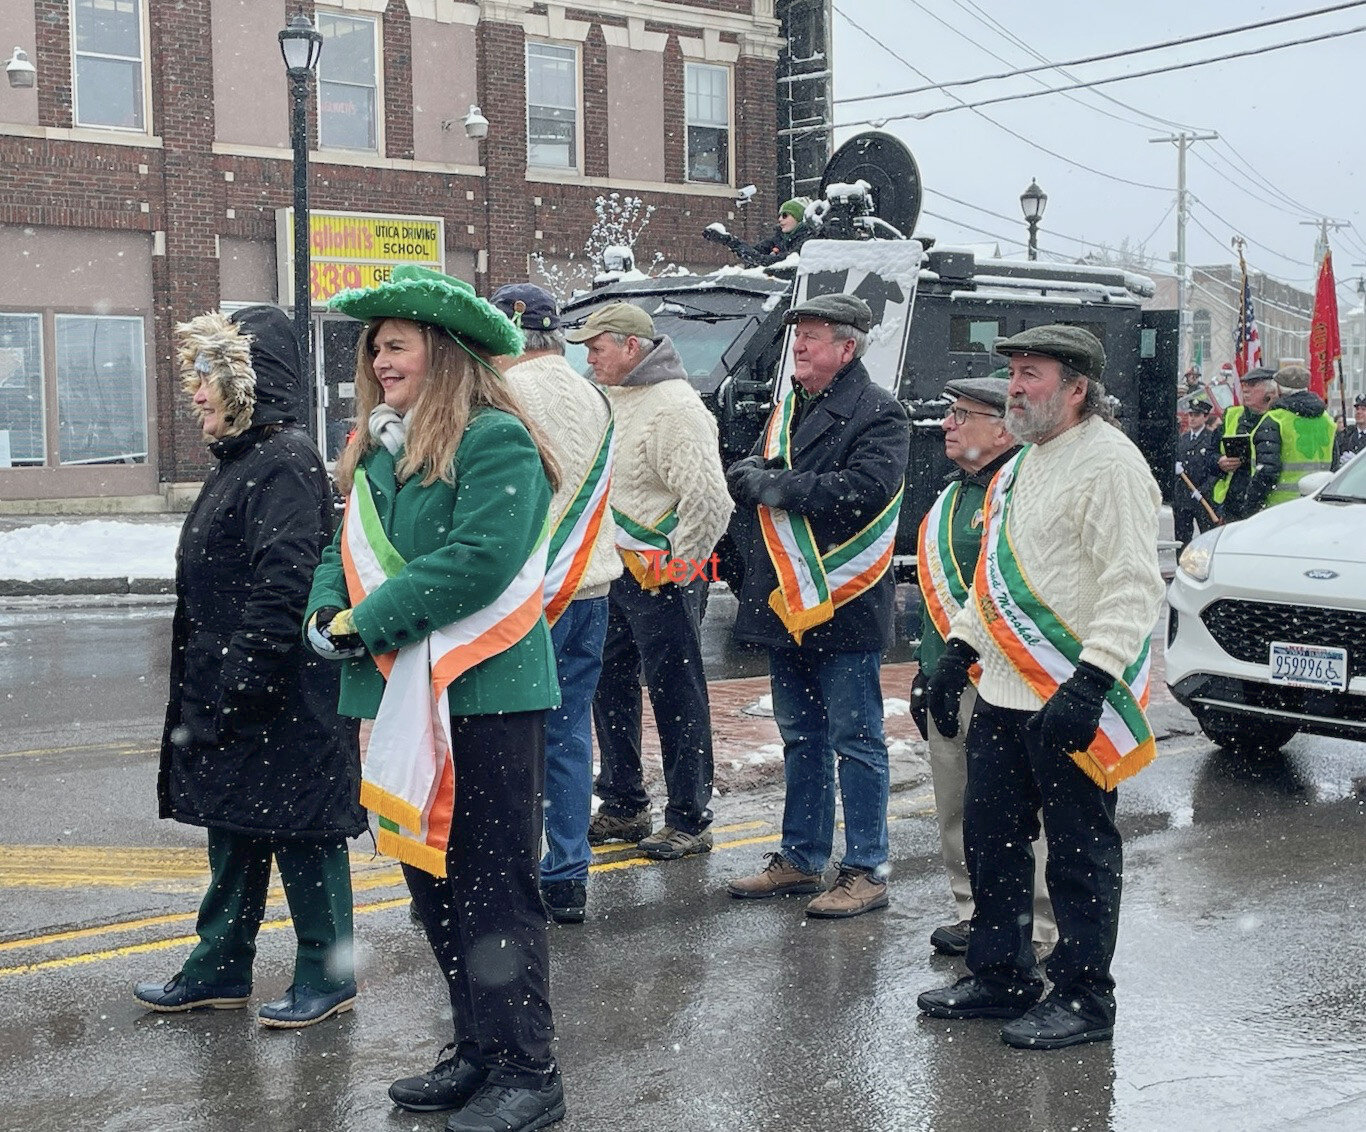 It's official as Utica Irish Cultural Center officials help kick off Utica's annual St. Patrick's Day Parade Saturday with past (2022) Grand Marshal Al Sisti at far right.